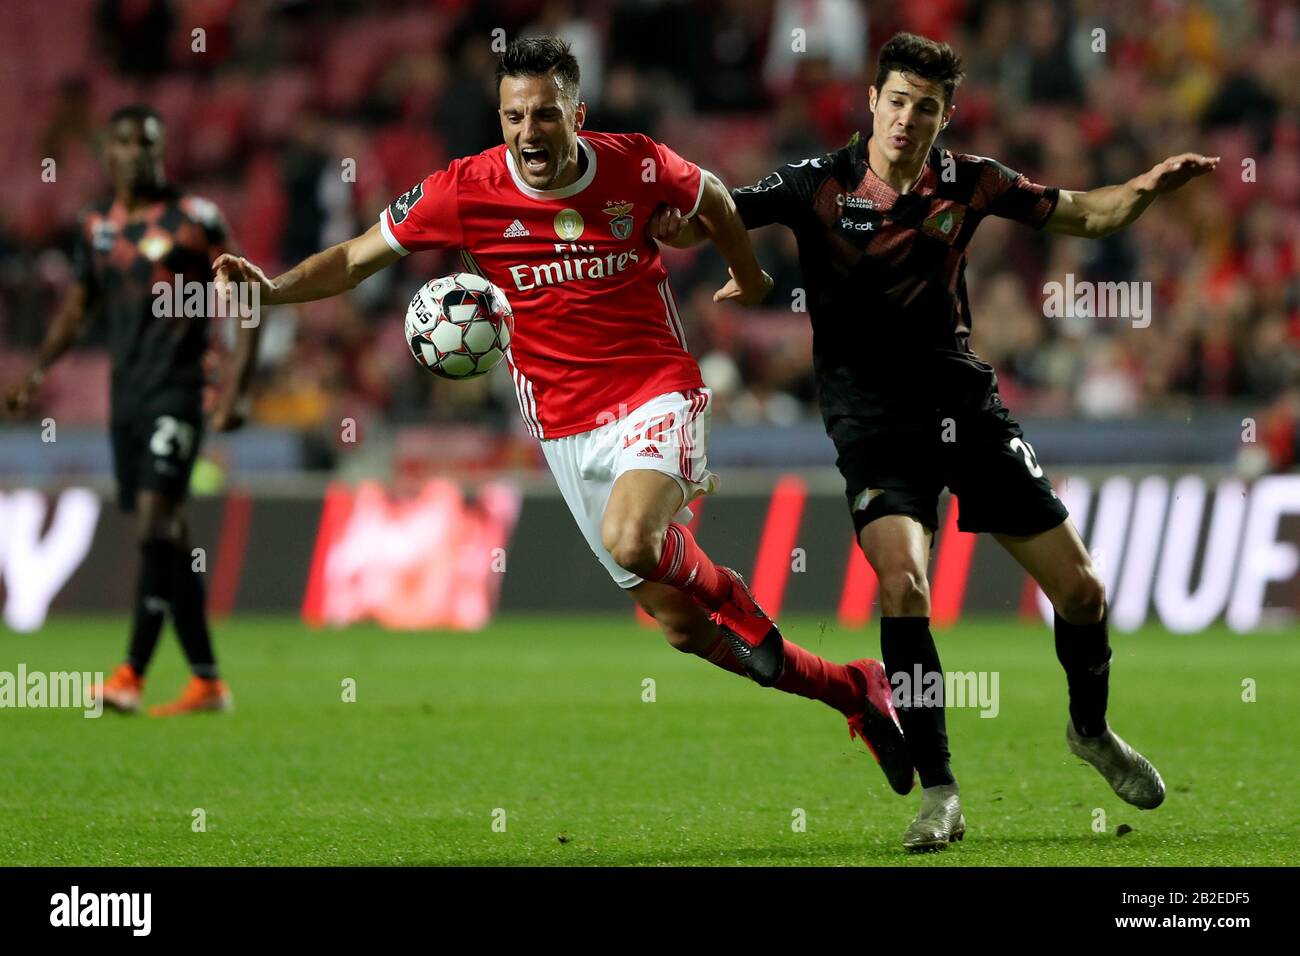 Lisbon, Portugal. 2nd Mar, 2020. Andreas Samaris of SL Benfica (L) vies with Filipe Soares of Moreirense FC during the Primeira Liga football match between SL Benfica and Moreirense FC in Lisbon, Portugal, on March 2, 2020. Credit: Petro Fiuza/Xinhua/Alamy Live News Stock Photo